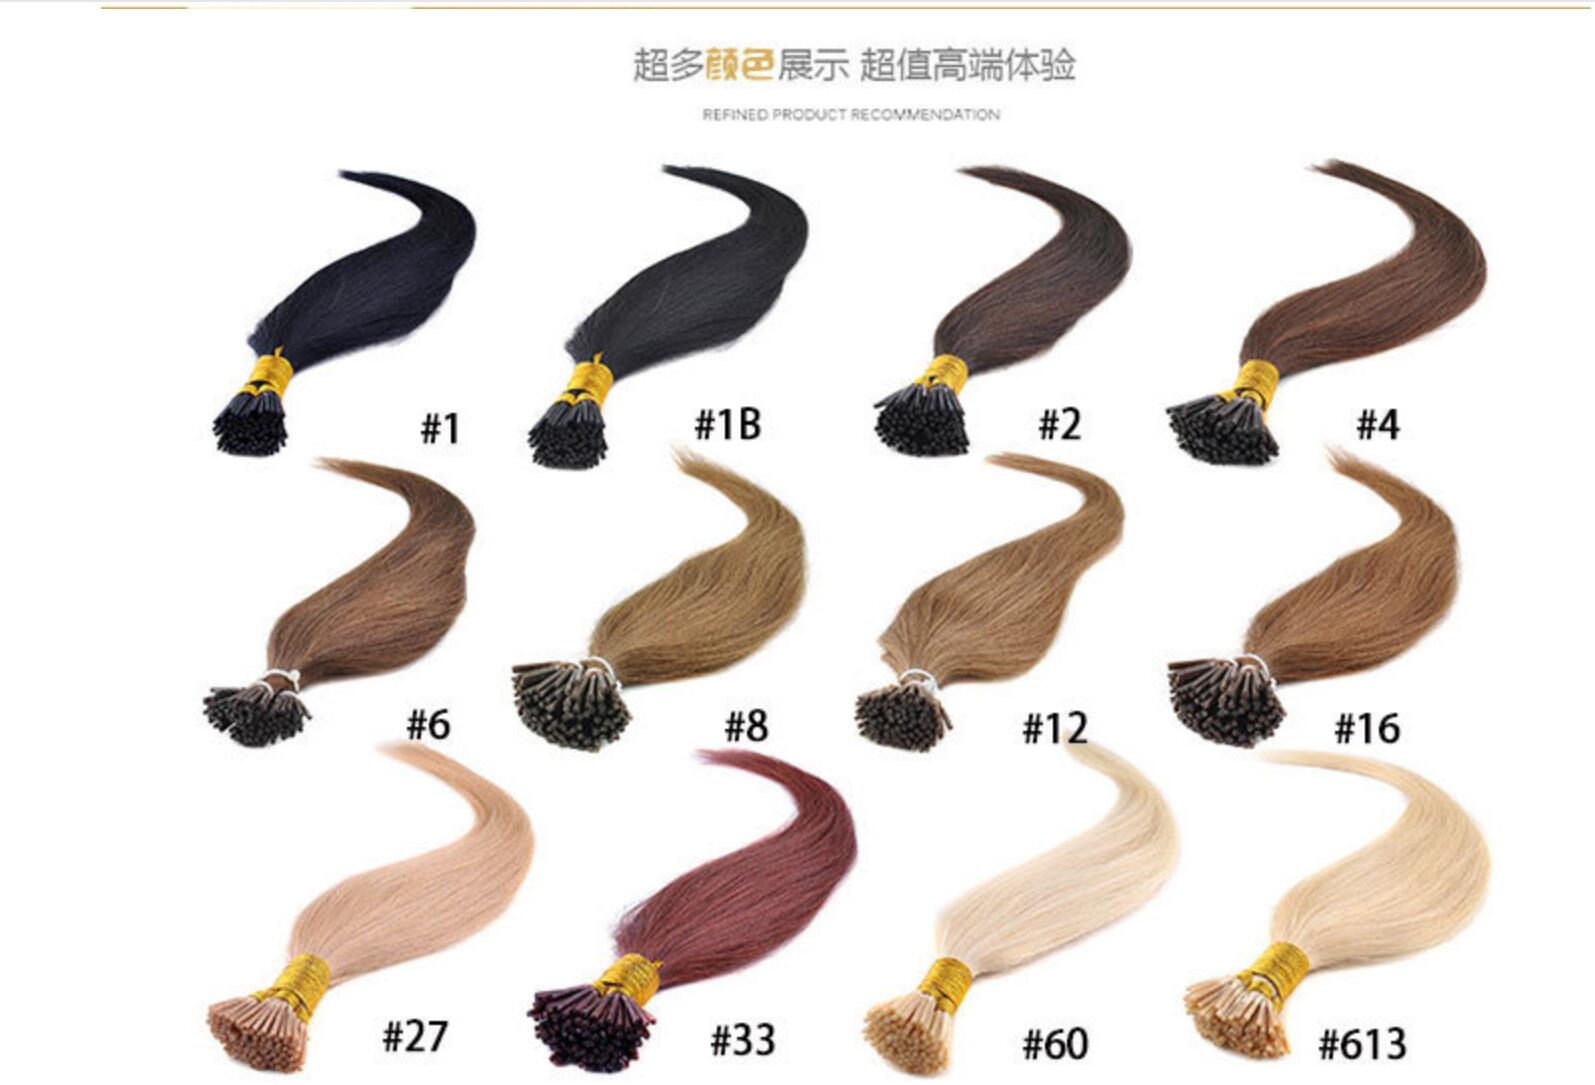 Implanted Hair Colours available